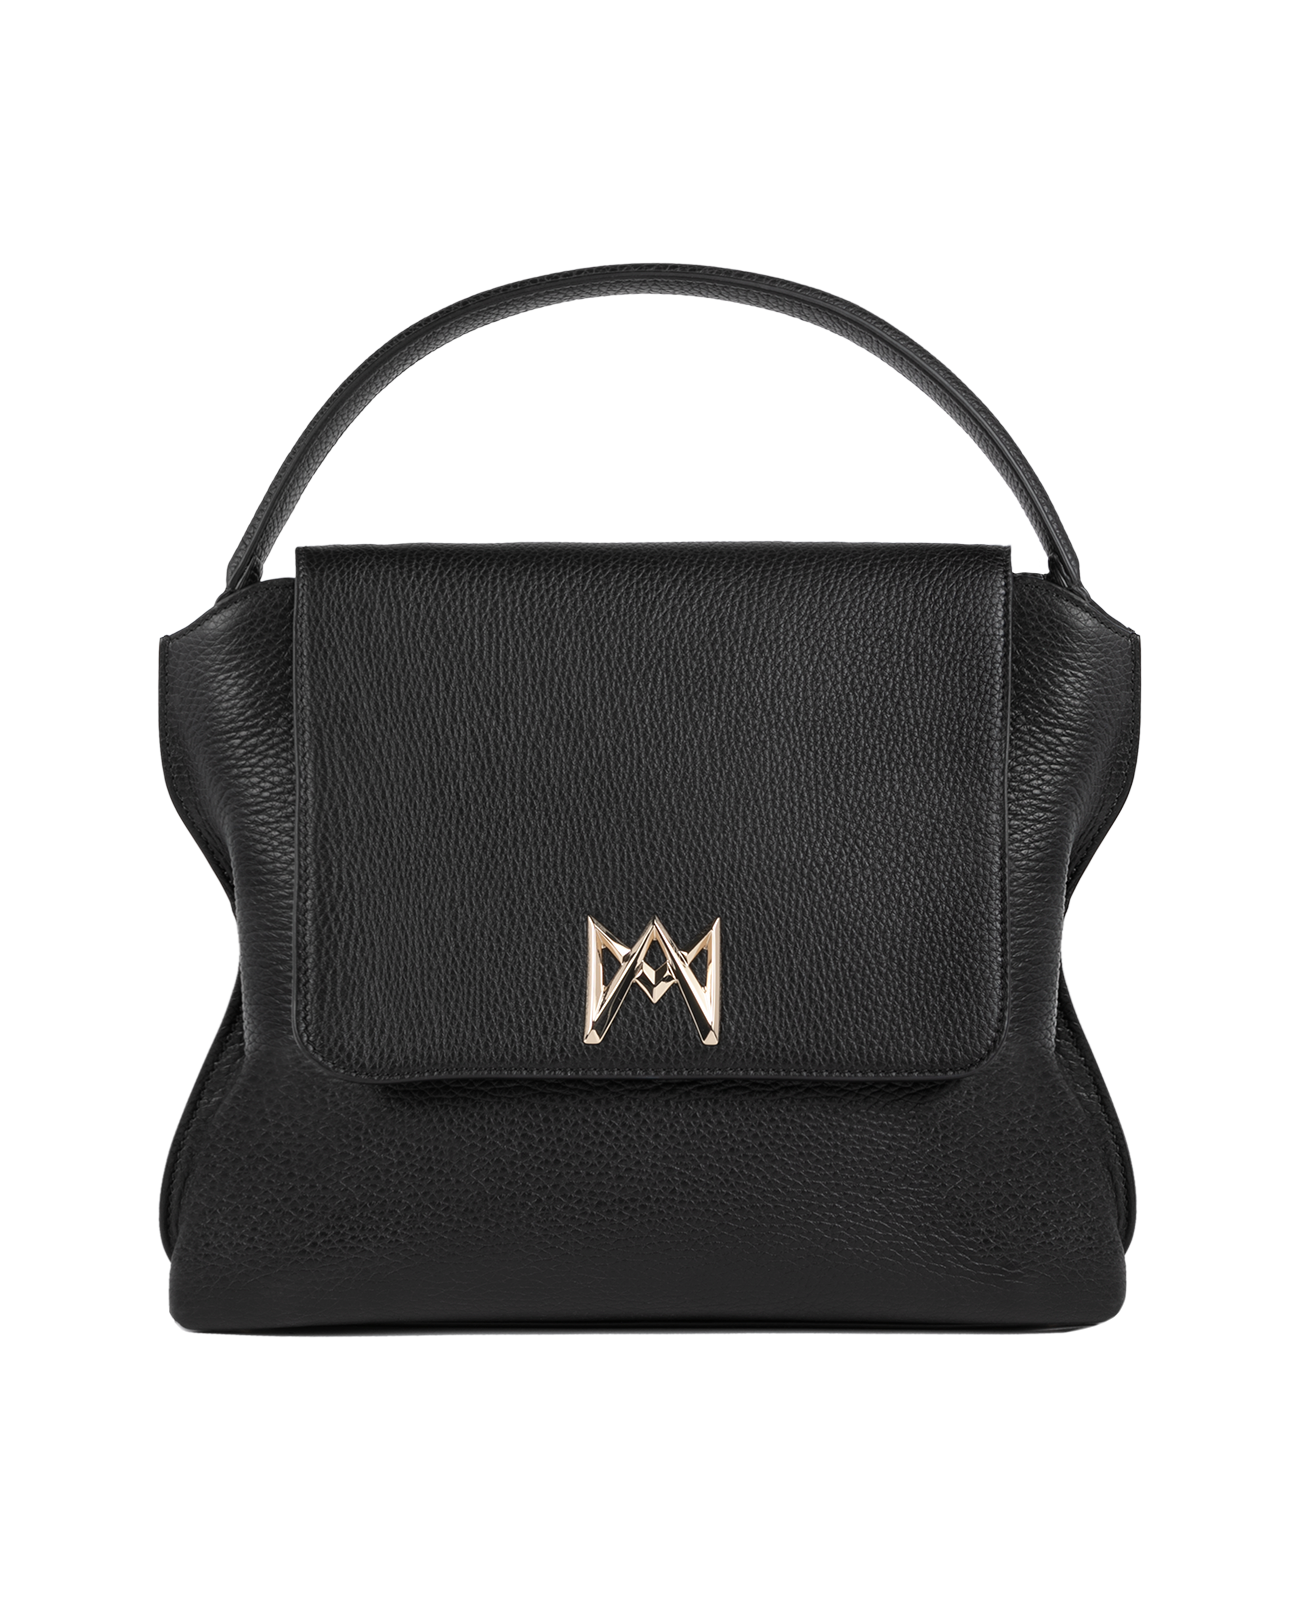 Cross-body bag in Italian full-grain leather, semi-aniline calf Italian leather with detachable shoulder strap.Three compartments, zip pocket in the back compartment. Magnetic flap closure with logo. Color: Black. Size:Large